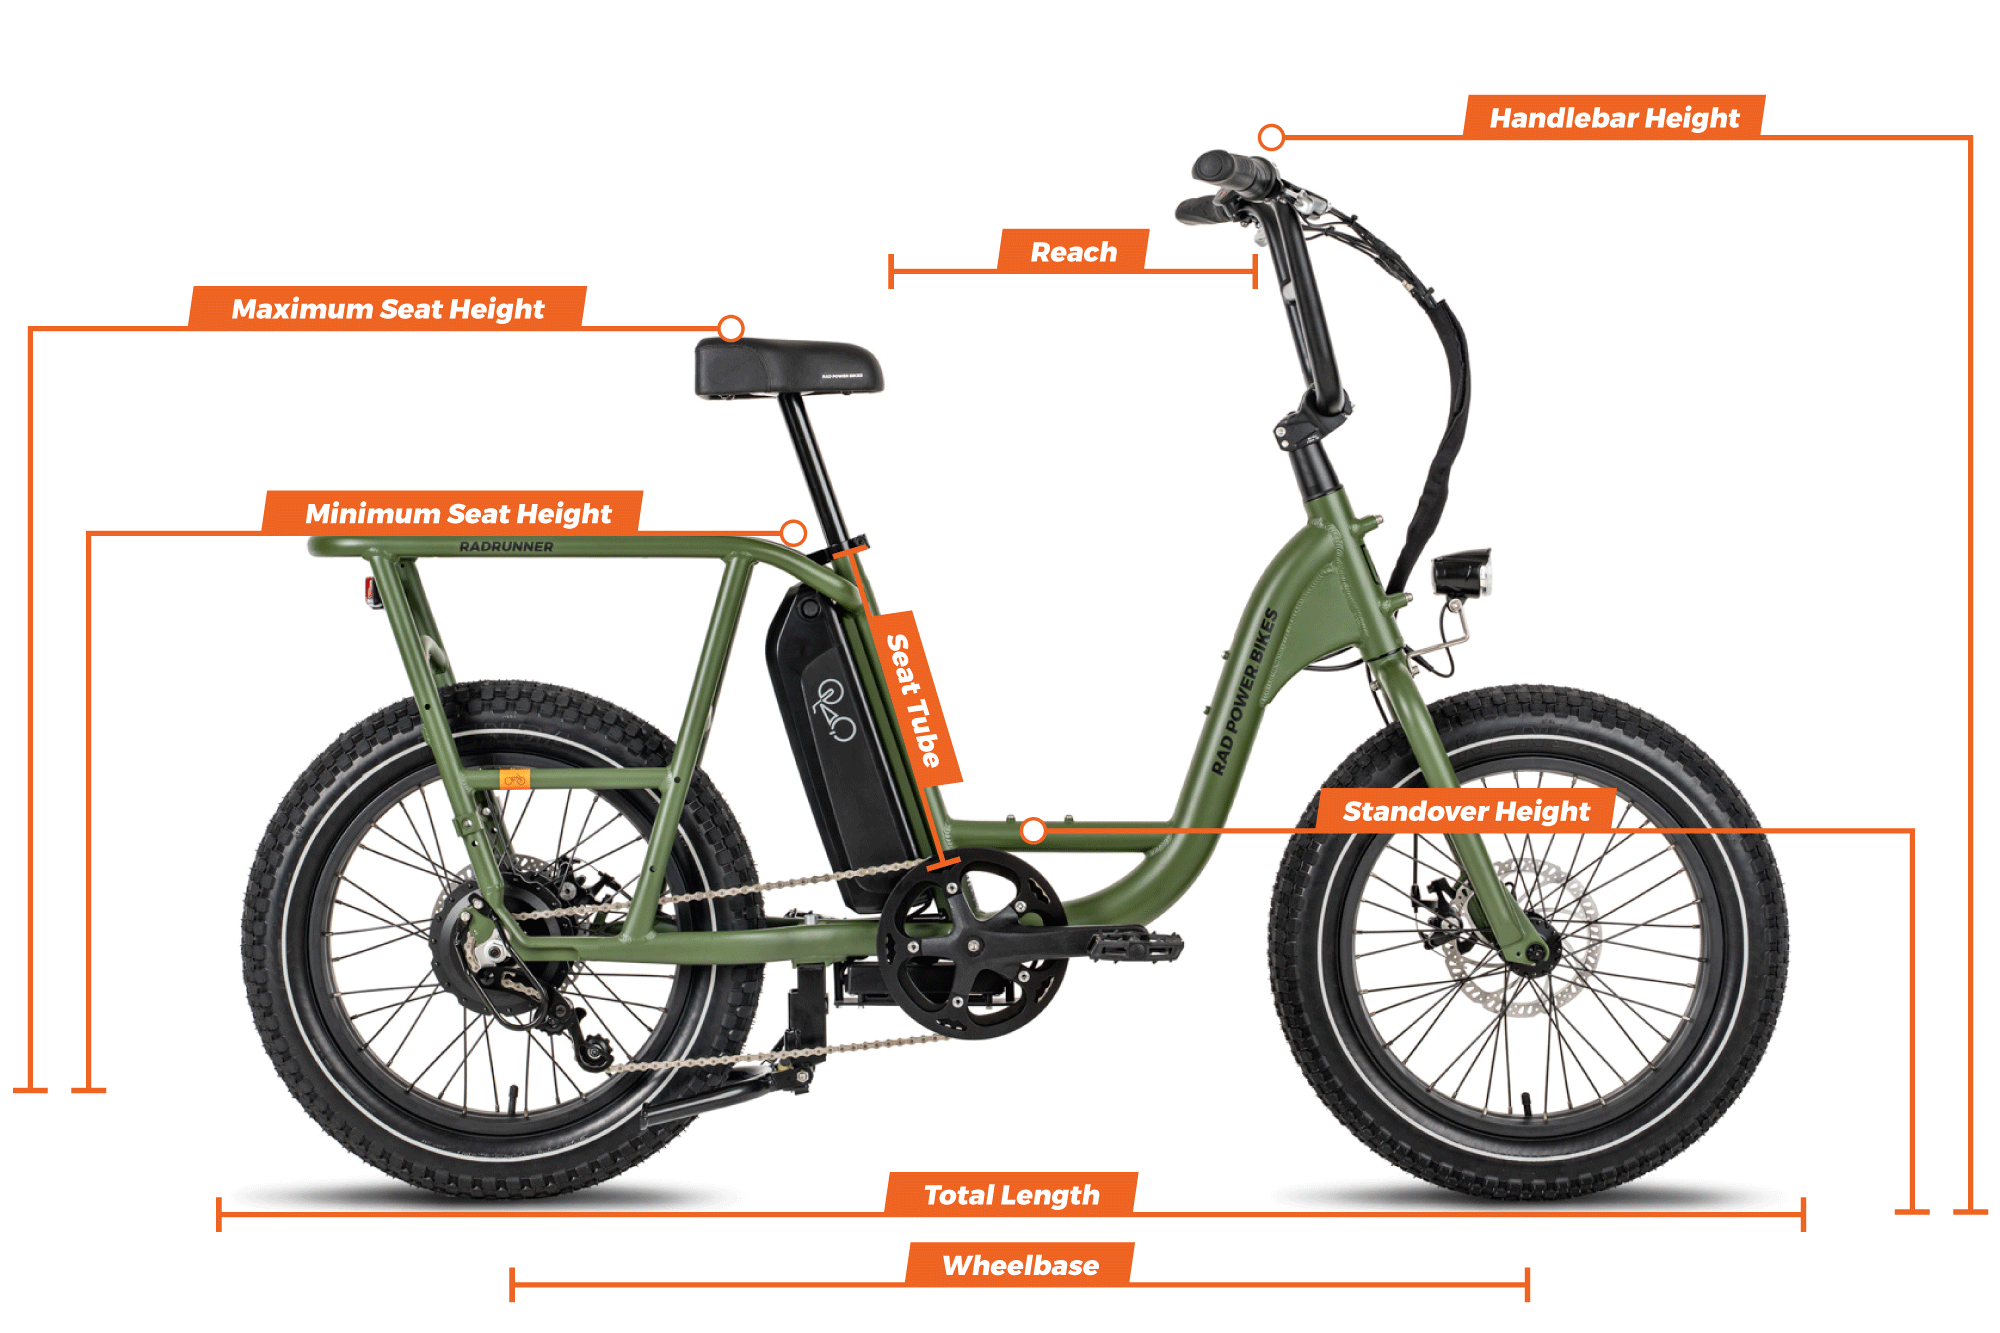 Geometry chart for the RadRunner 2 Electric Utility Bike